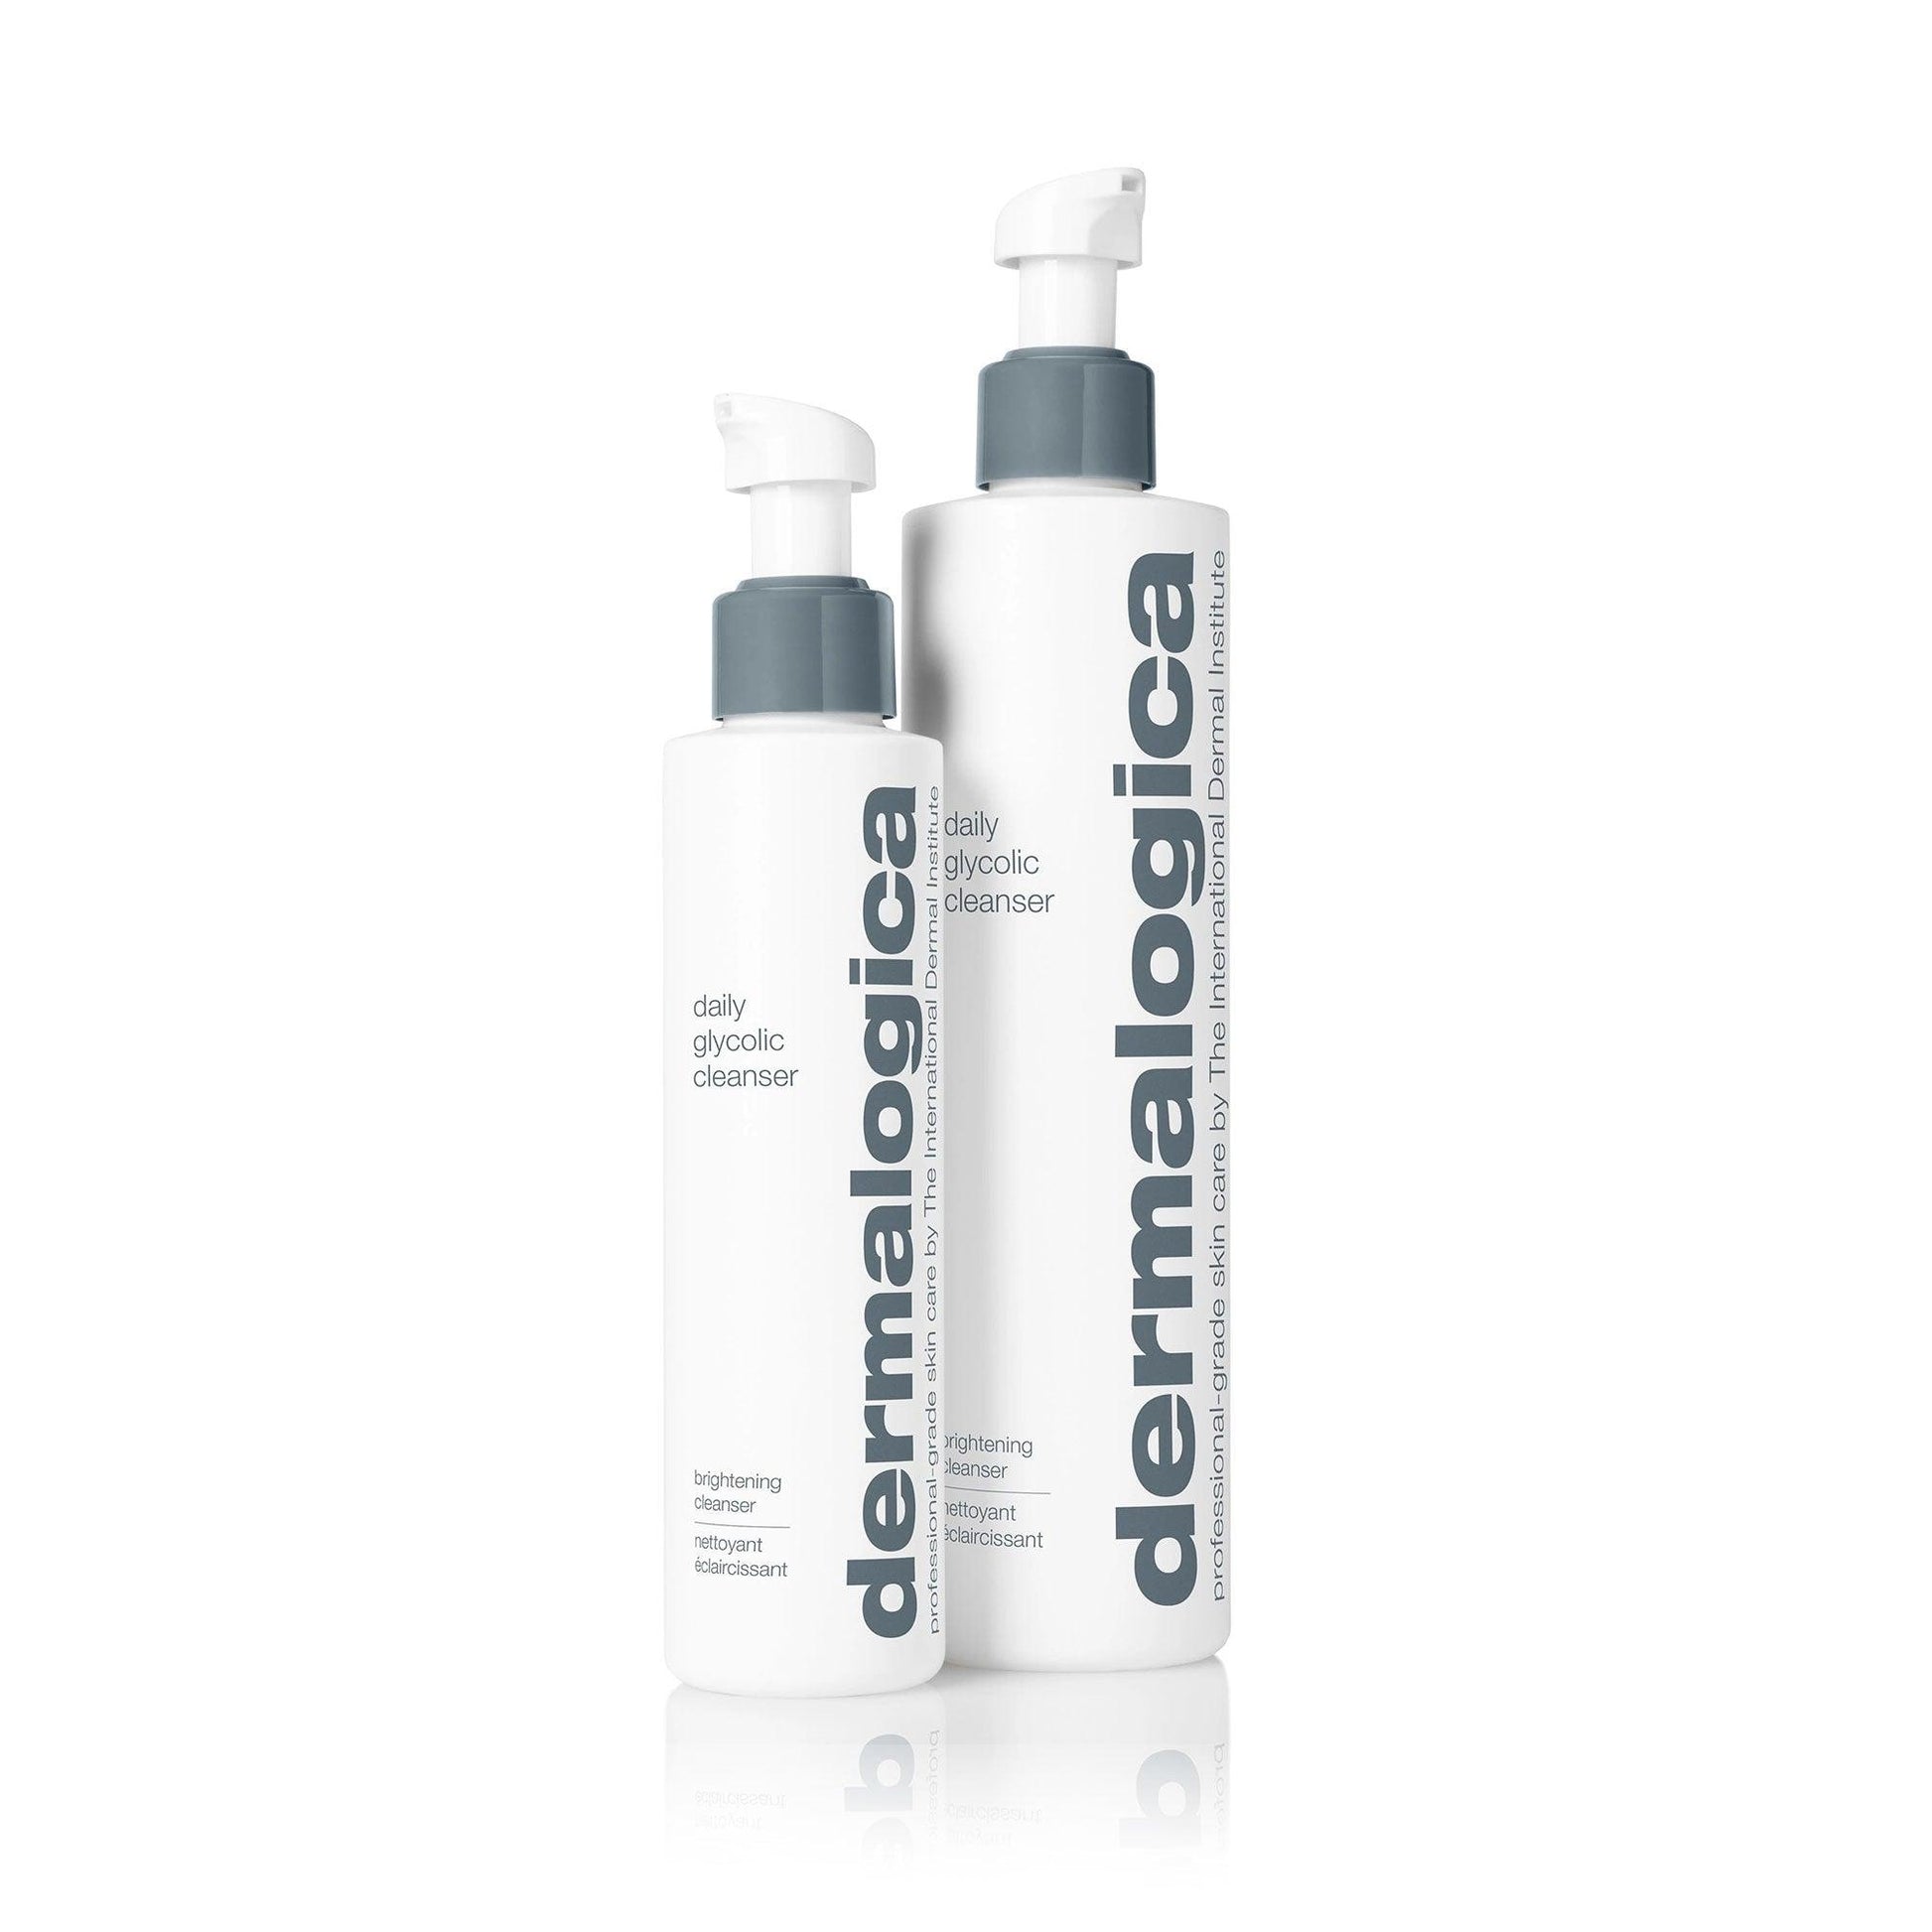 daily glycolic cleanser 295ml - Dermalogica Malaysia